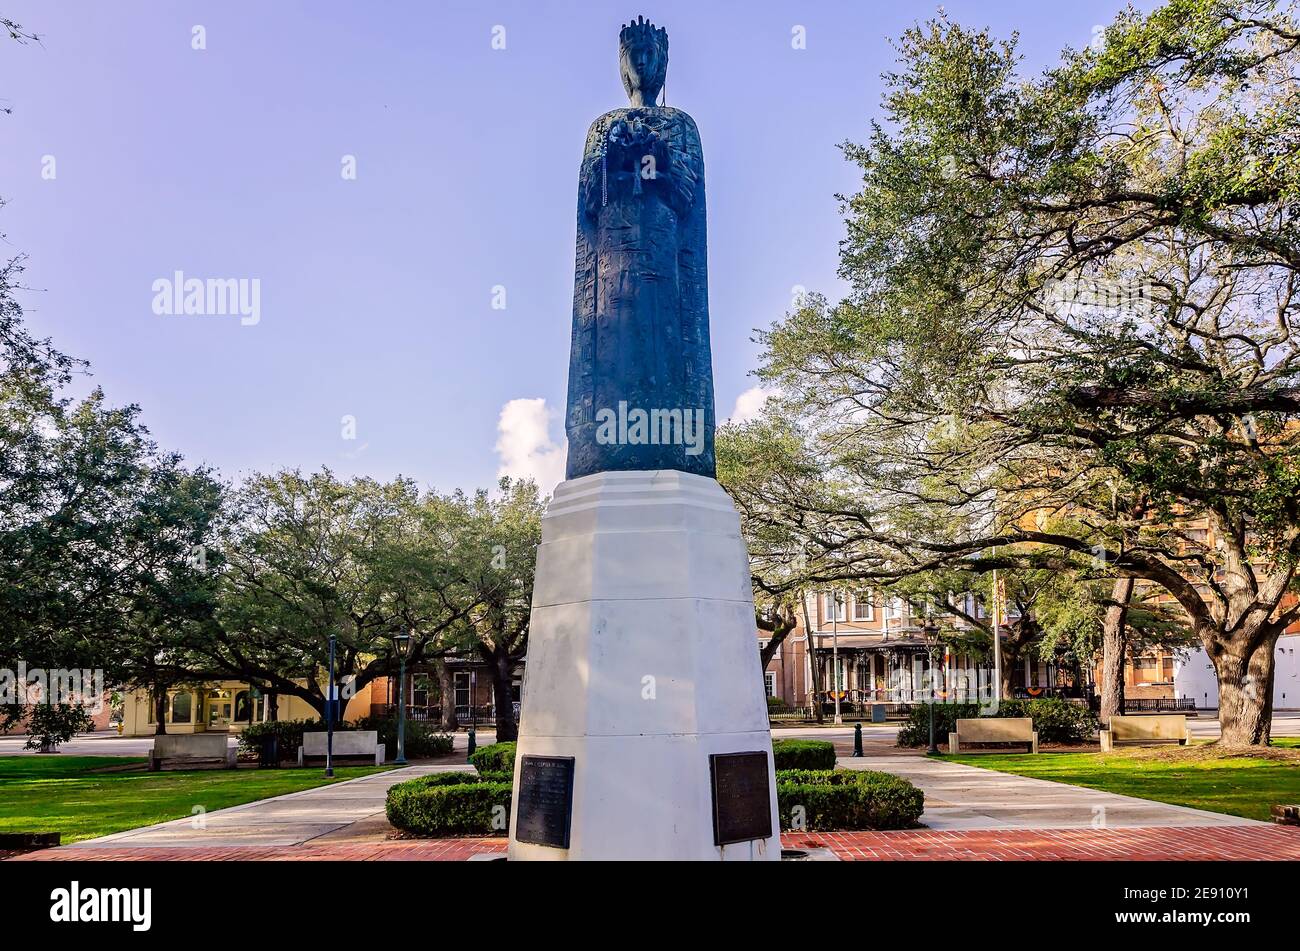 A statue of Queen Isabella of Spain stands in Spanish Plaza, Jan. 31, 2021, in Mobile, Alabama. Mobile was ruled by Spain from 1780 to 1813. Stock Photo